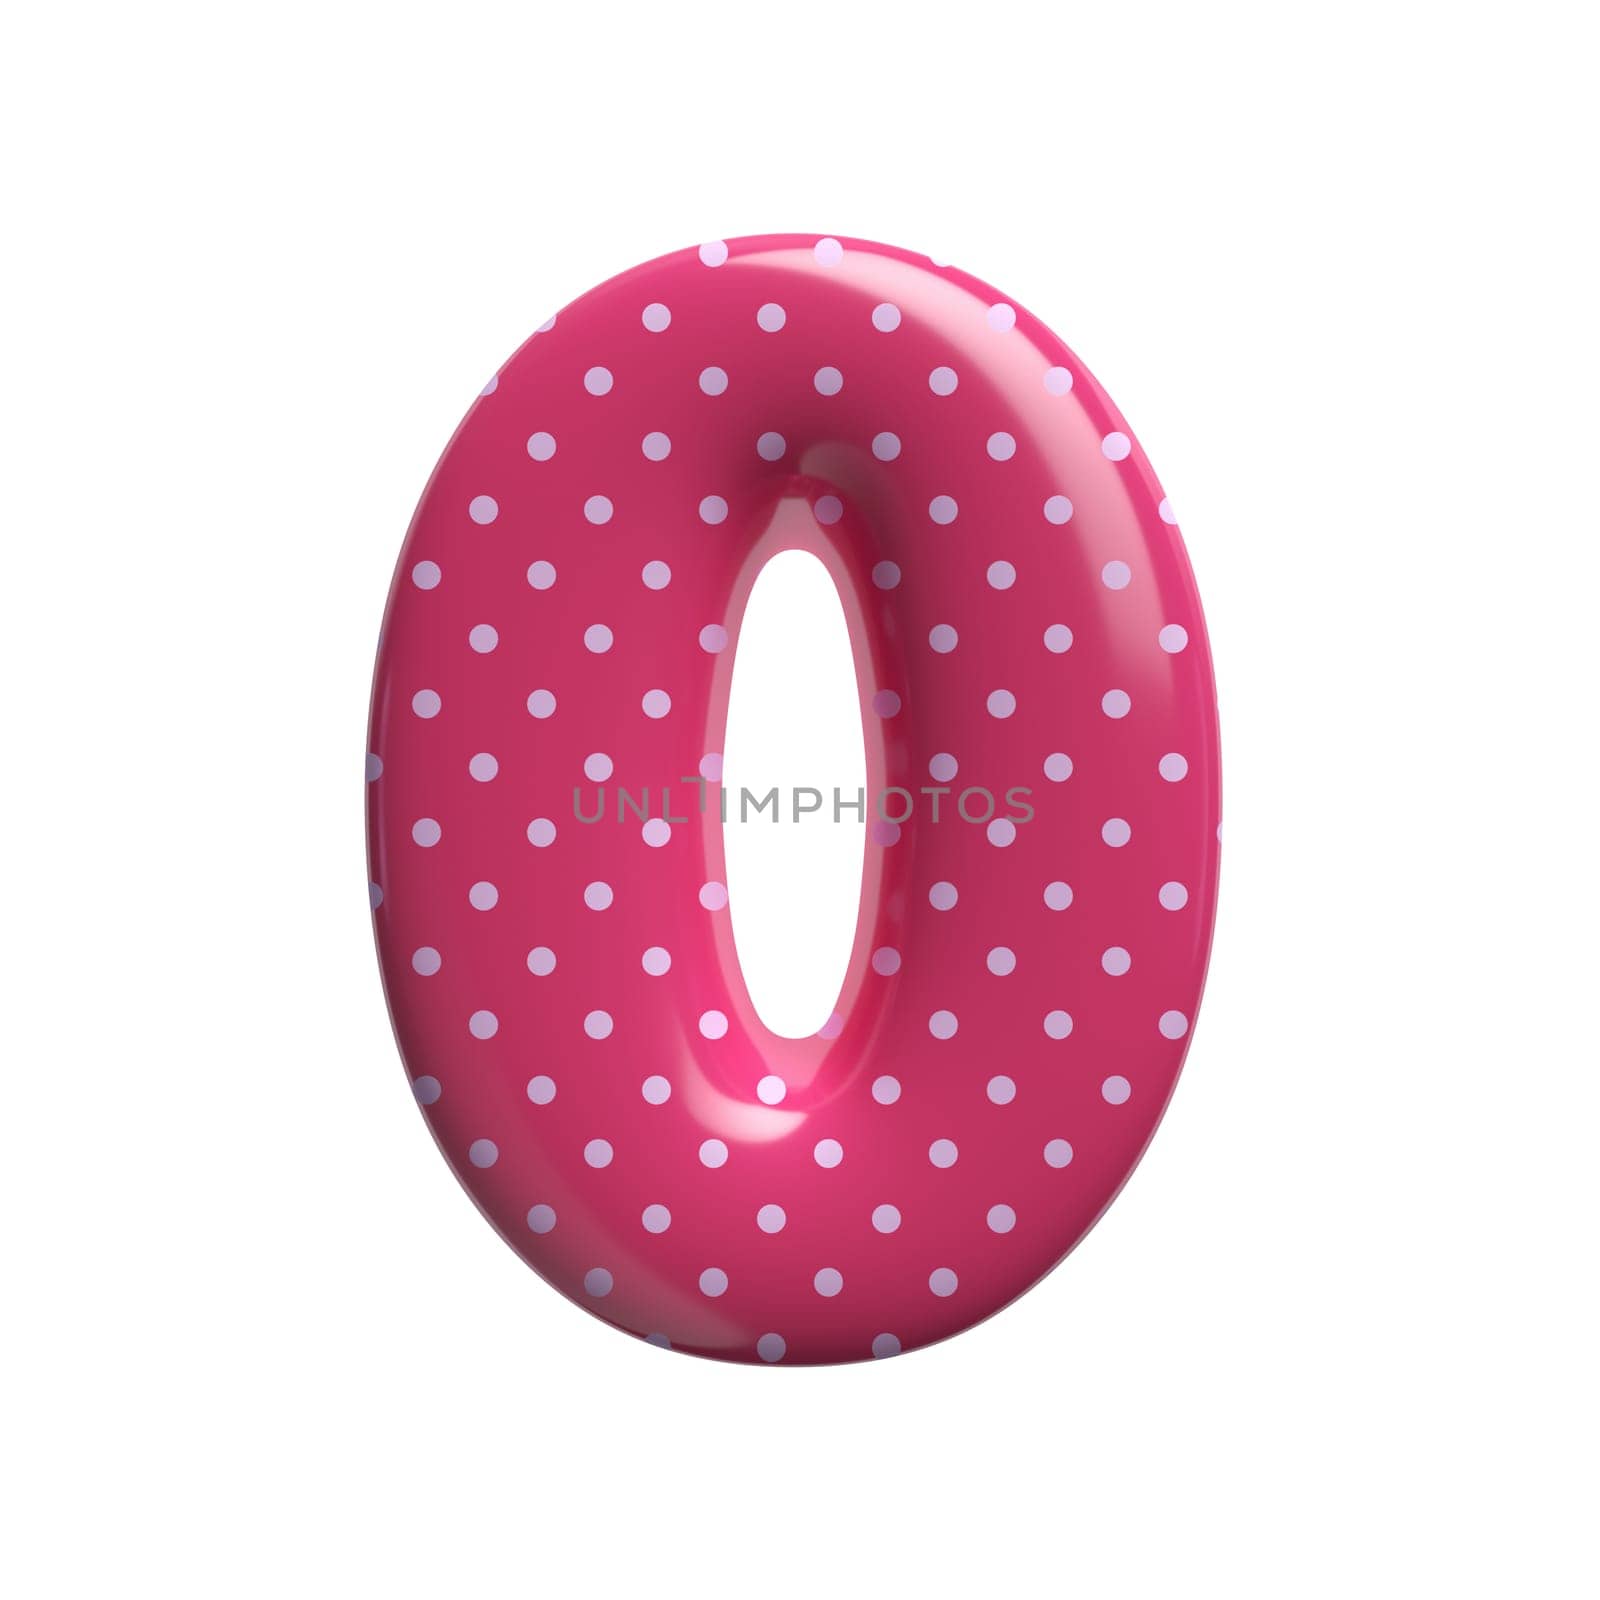 Polka dot number 0 - 3d pink retro digit - Suitable for Fashion, retro design or decoration related subjects by chrisroll